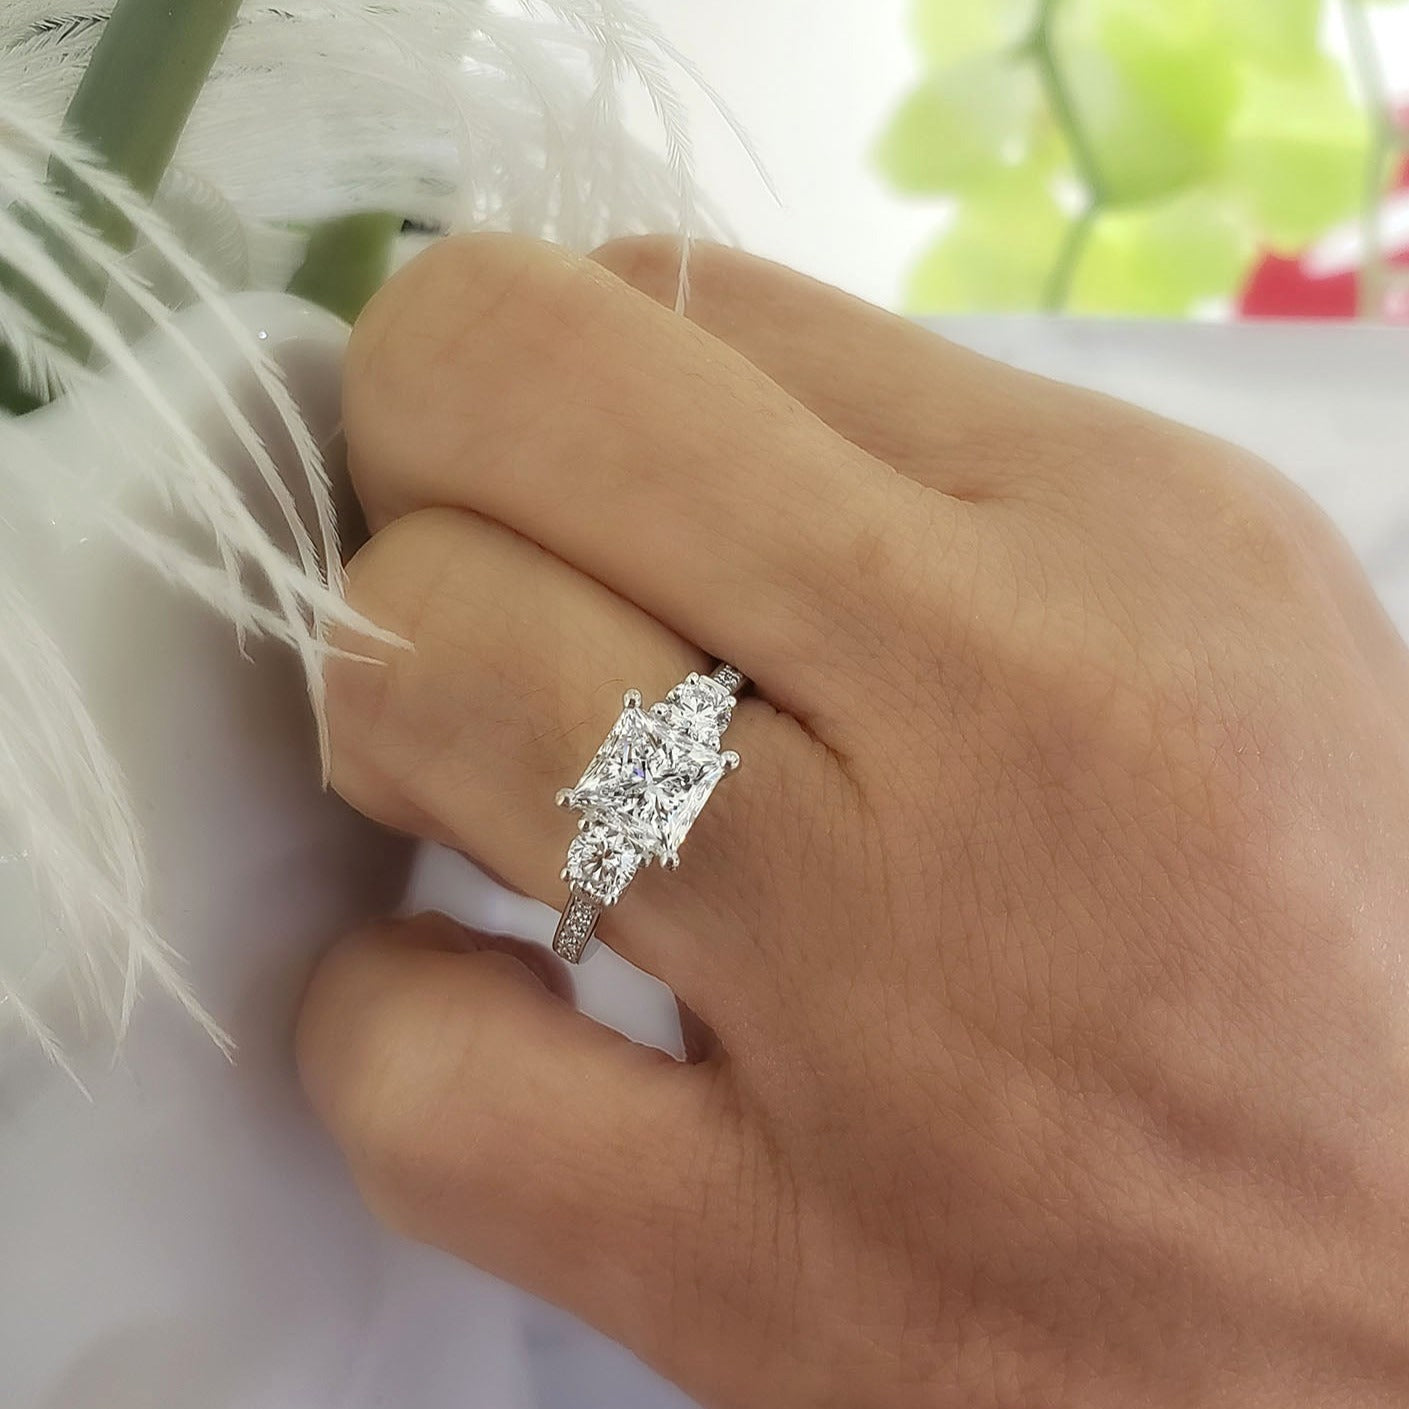 Complete Princess Cut Engagement Ring